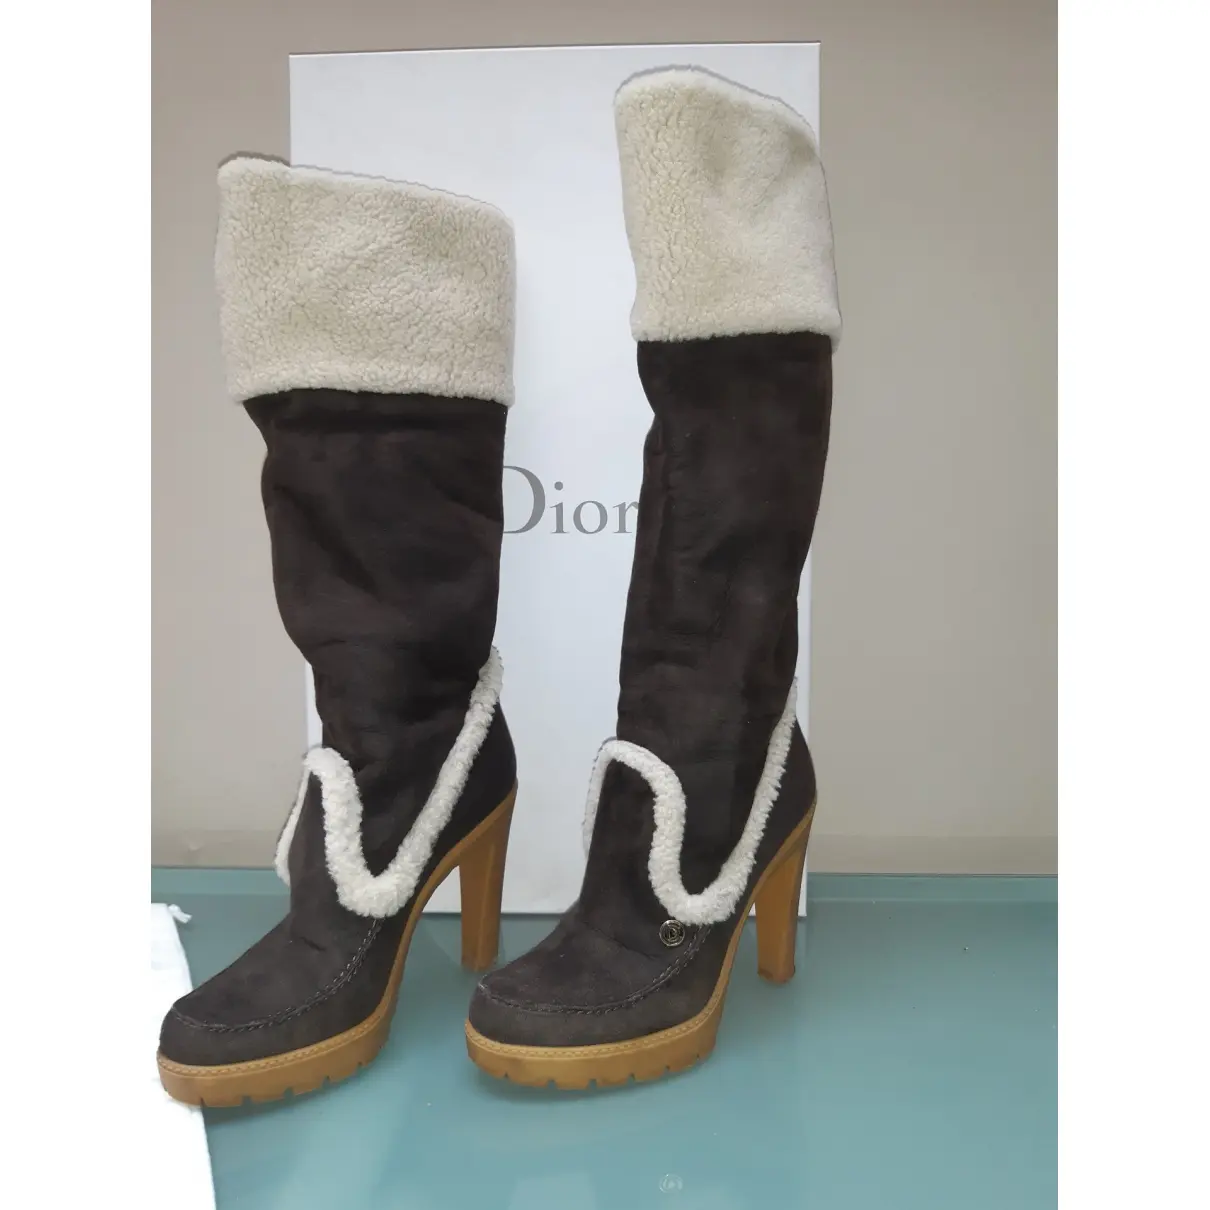 Buy Dior Shearling snow boots online